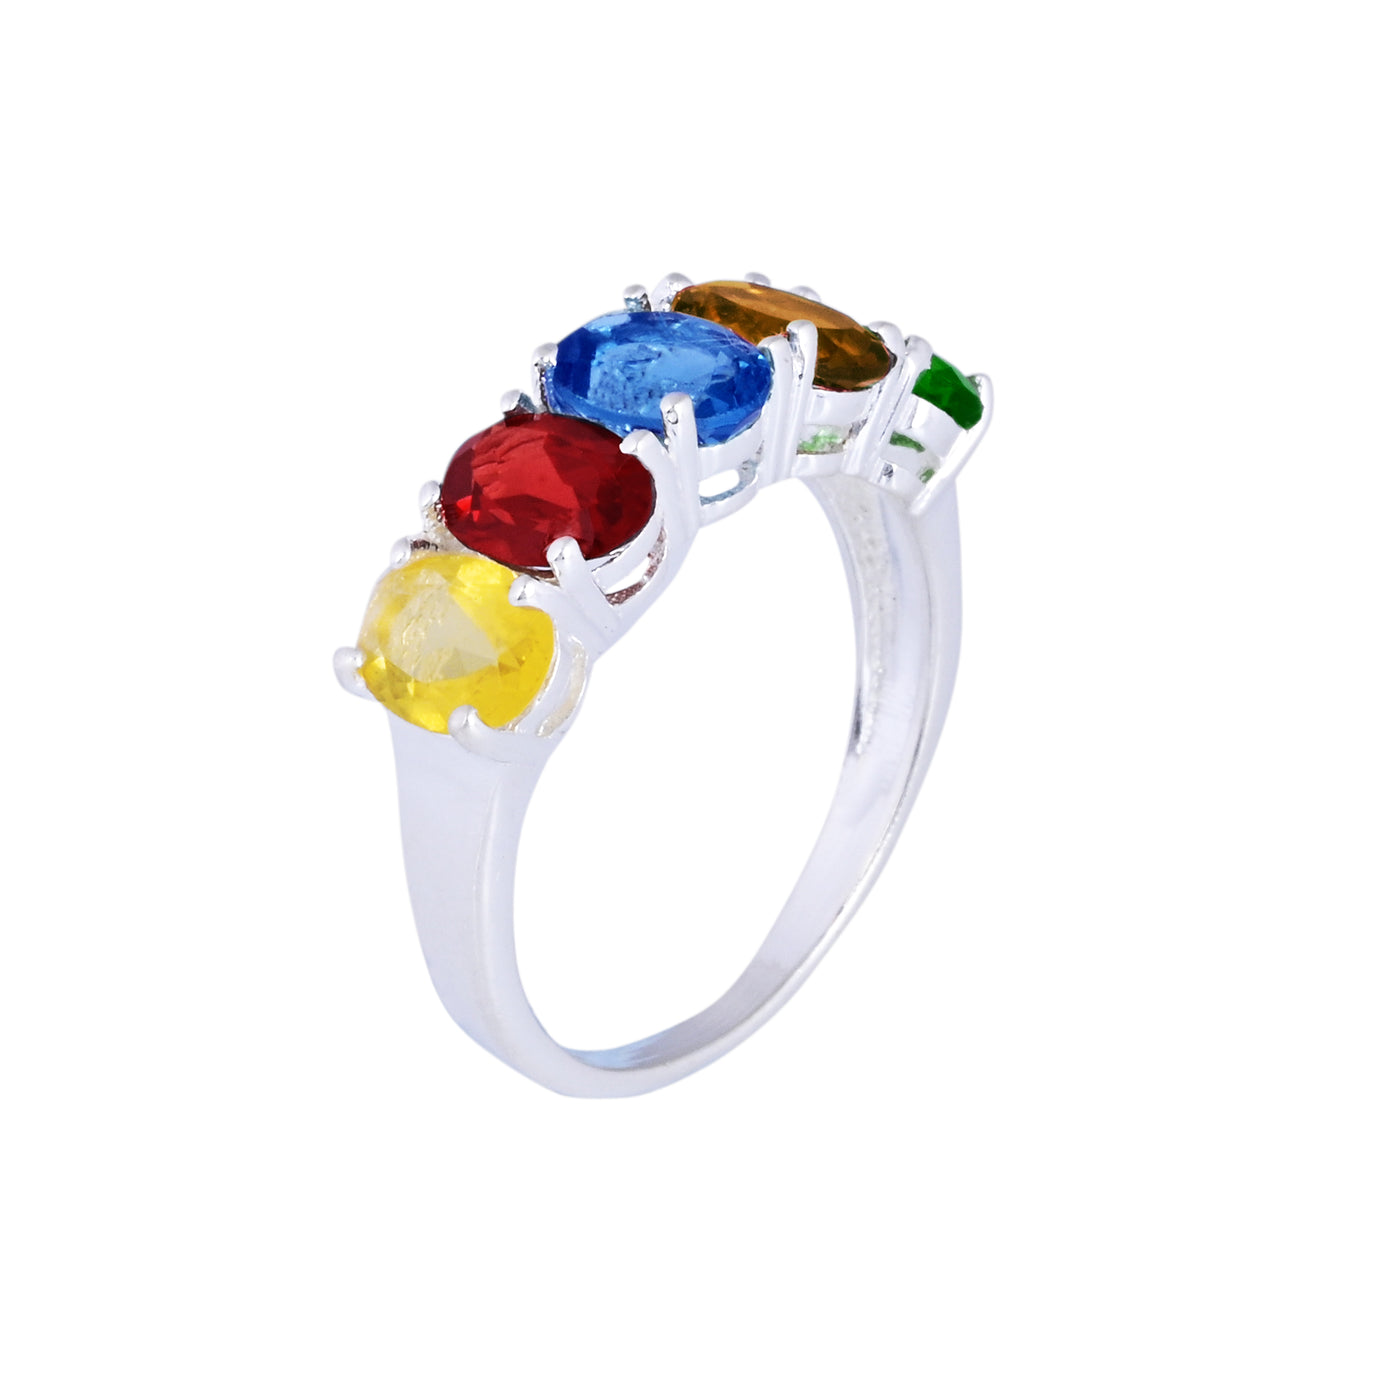 Multi Colored Gem Stone Ring in 925 Sterling Silver